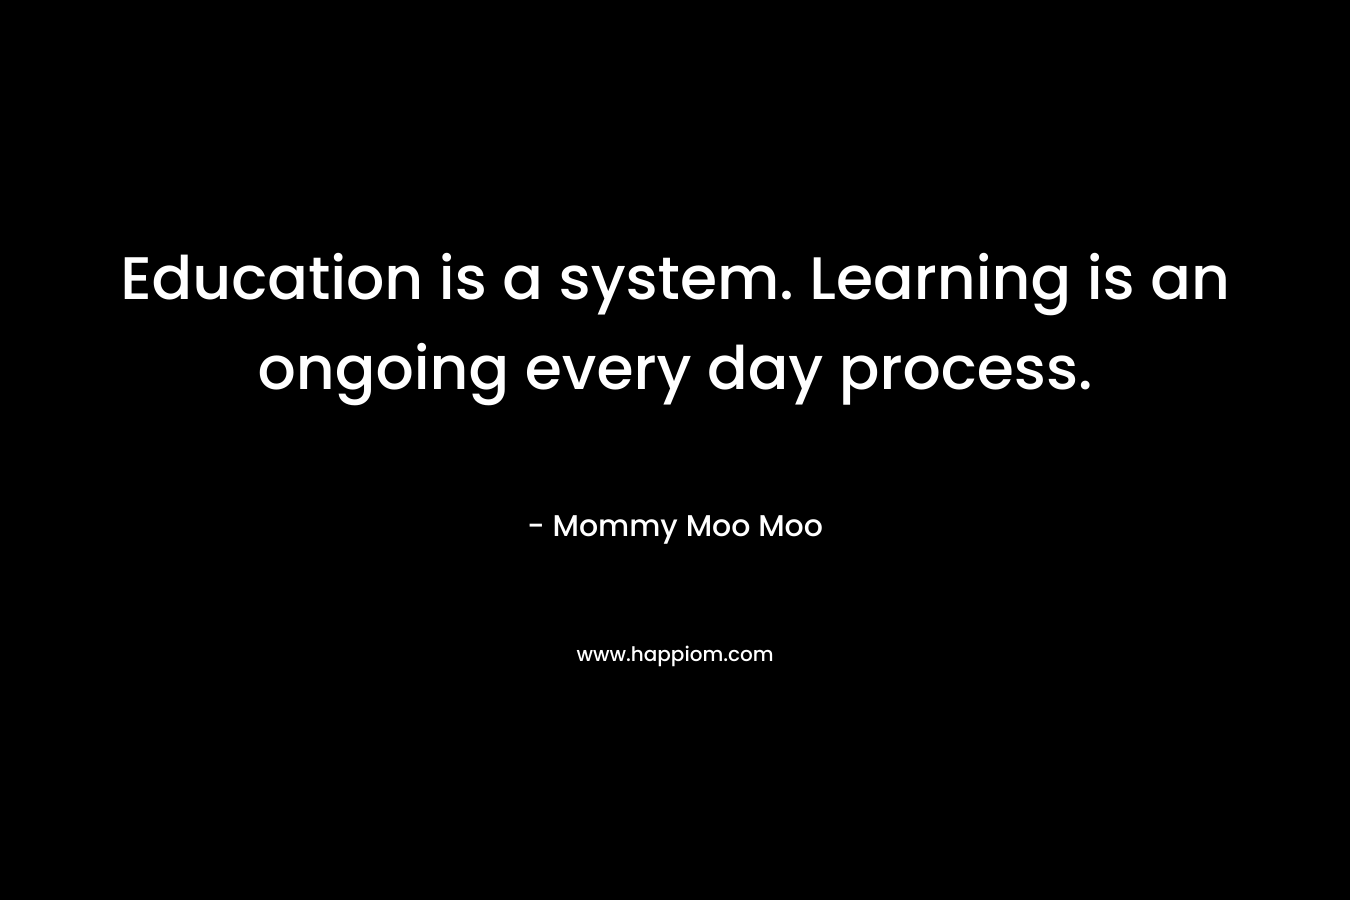 Education is a system. Learning is an ongoing every day process. – Mommy Moo Moo